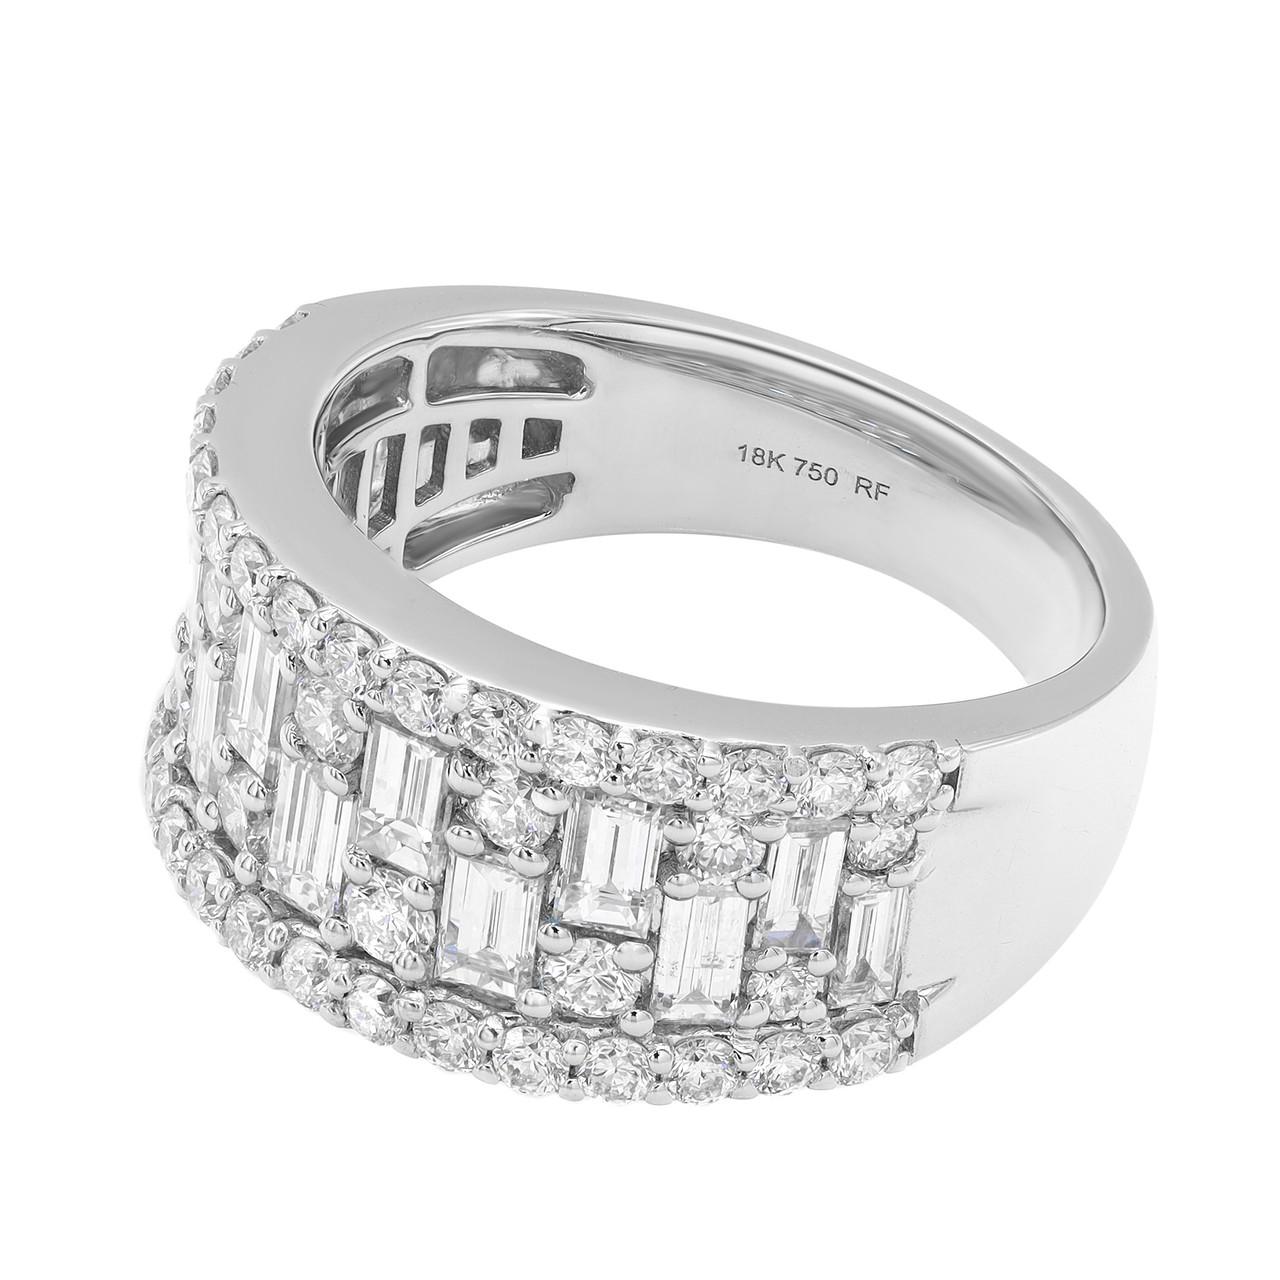 Upgrade your ring stack with our stunning 2.00 Carat Round and Baguette Diamond Fashion Band in 18K White Gold. This ring is designed to take your breath away. It features a captivating arrangement of round and baguette diamonds set in 18K white